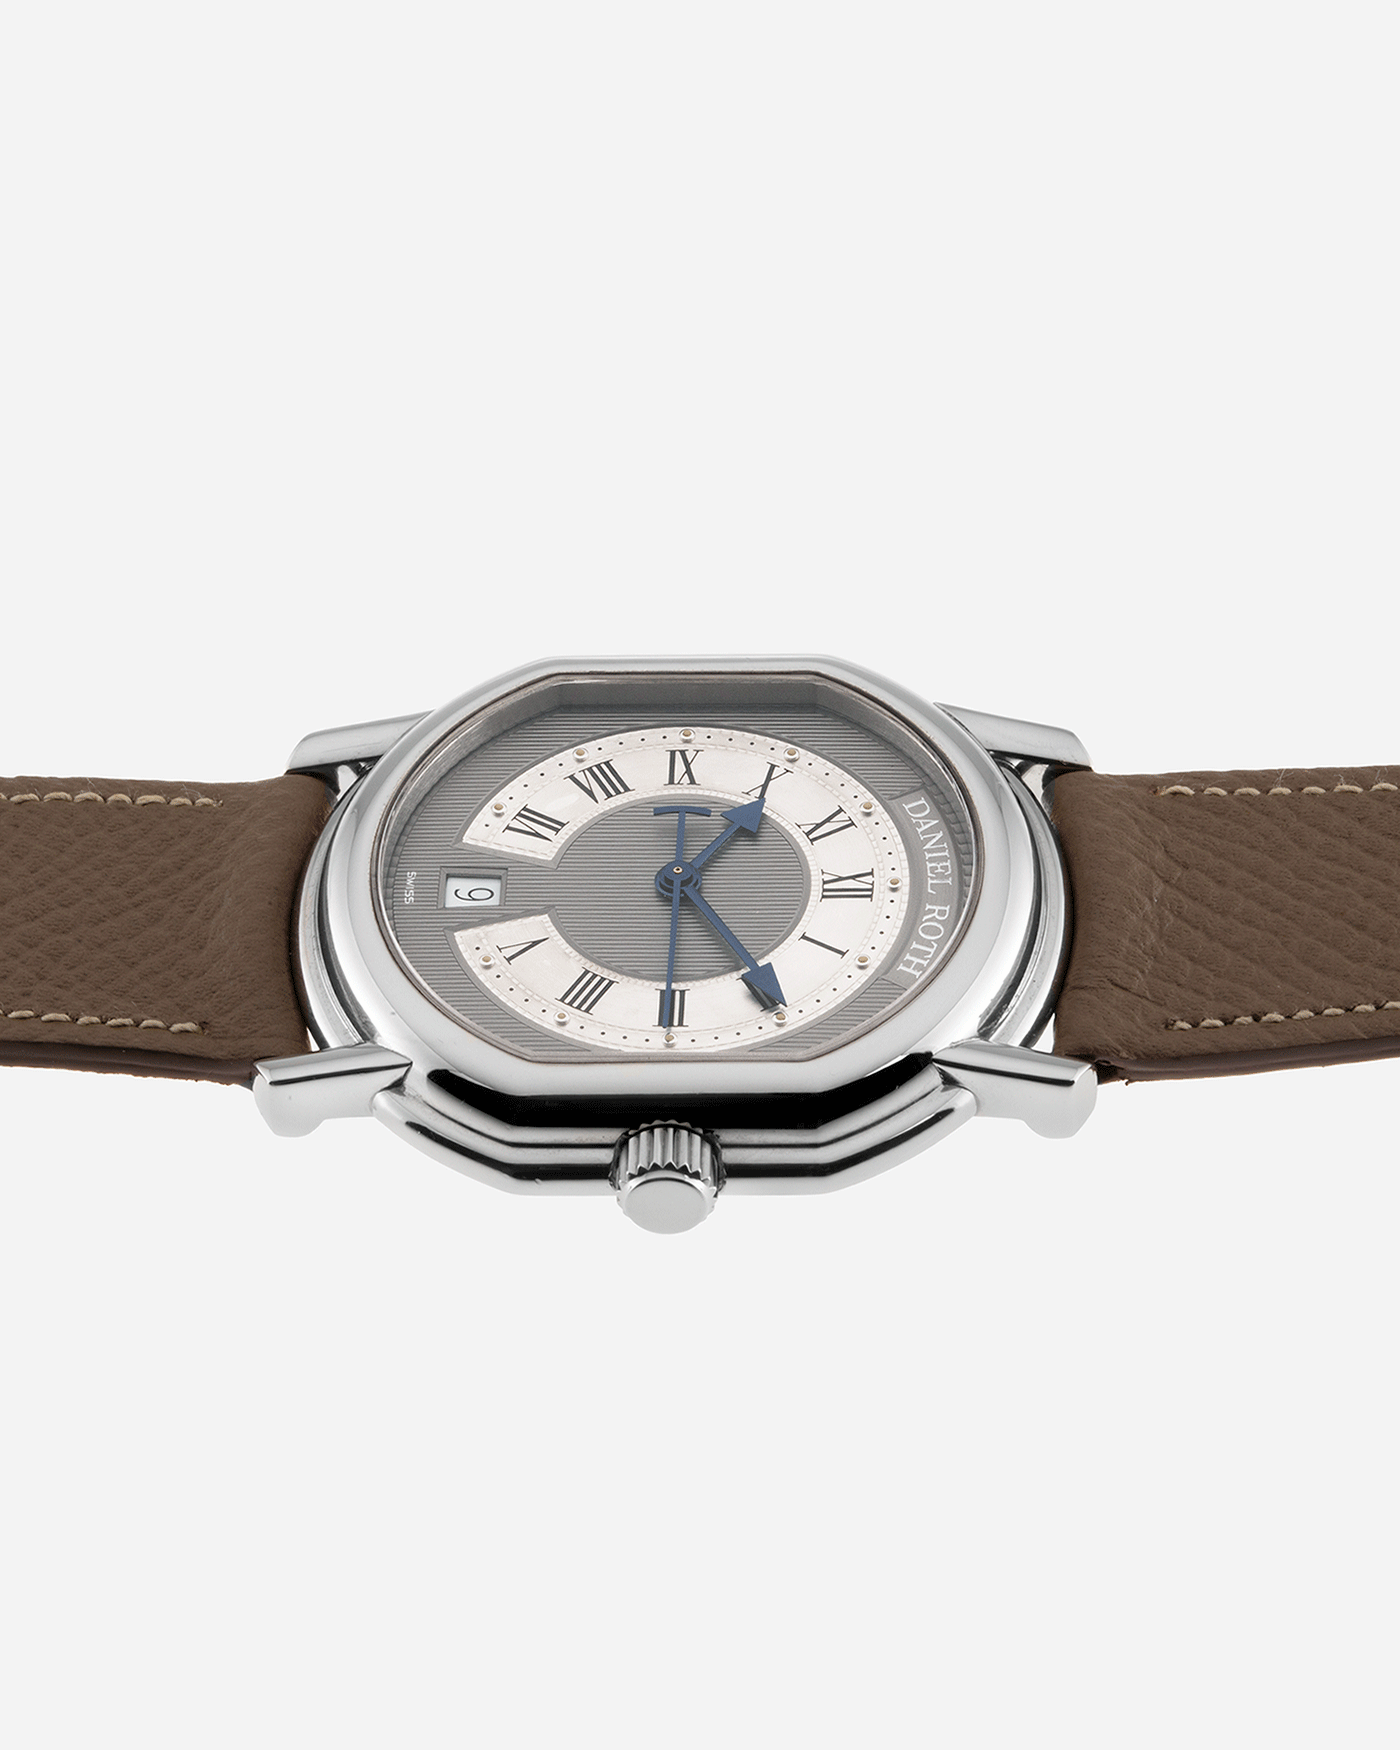 Brand: Daniel Roth Year: 1990’s Model: S177 Material: Stainless Steel Case Diameter: 35mmX38mm Bracelet/Strap: Nostime Taupe Grained Calf with Generic Stainless Steel Tang Buckle